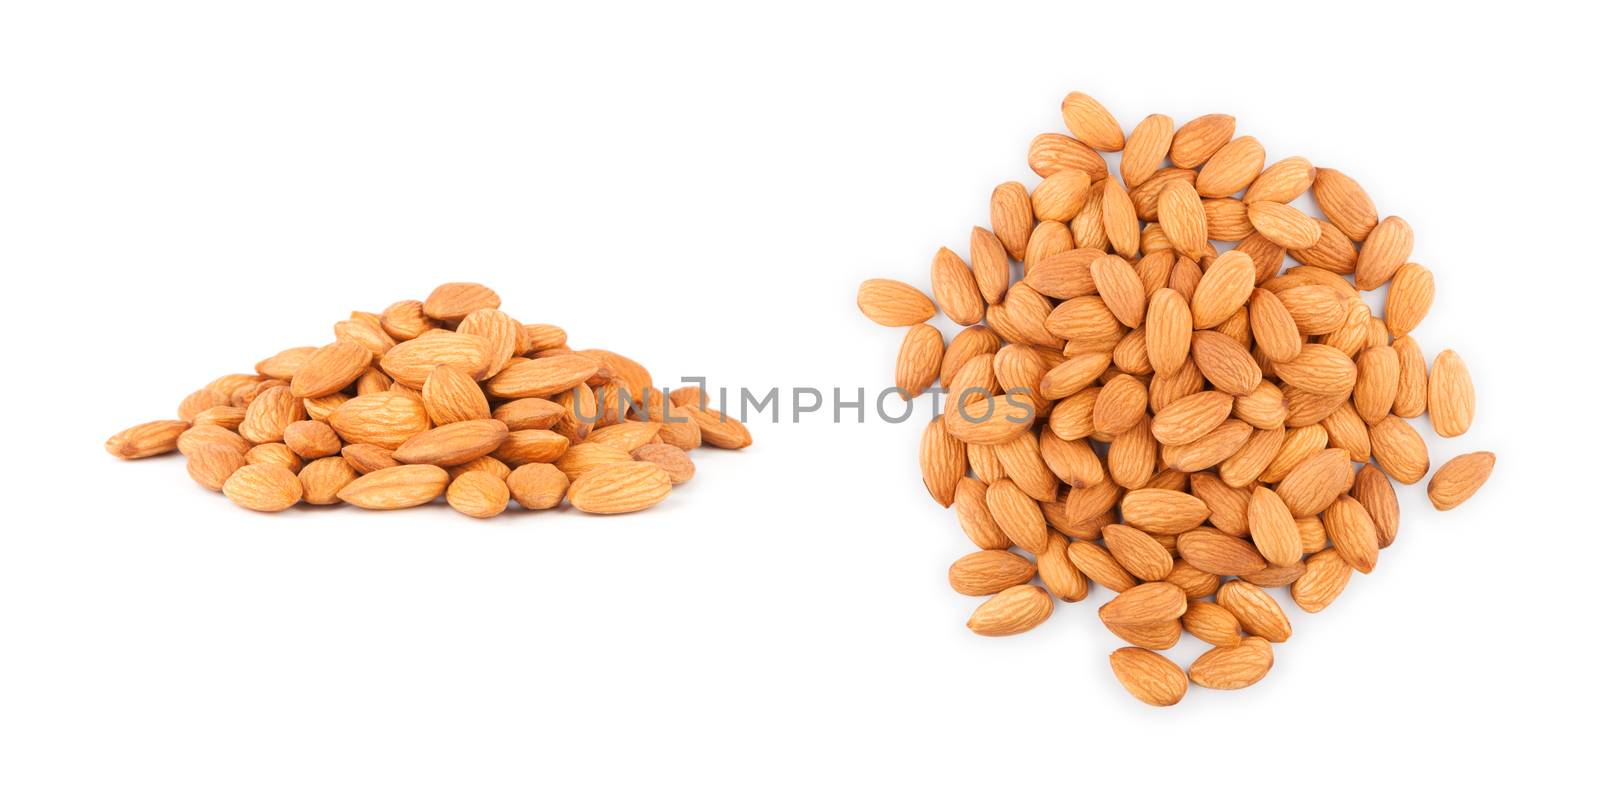 A handful of almonds on white background, side and top view